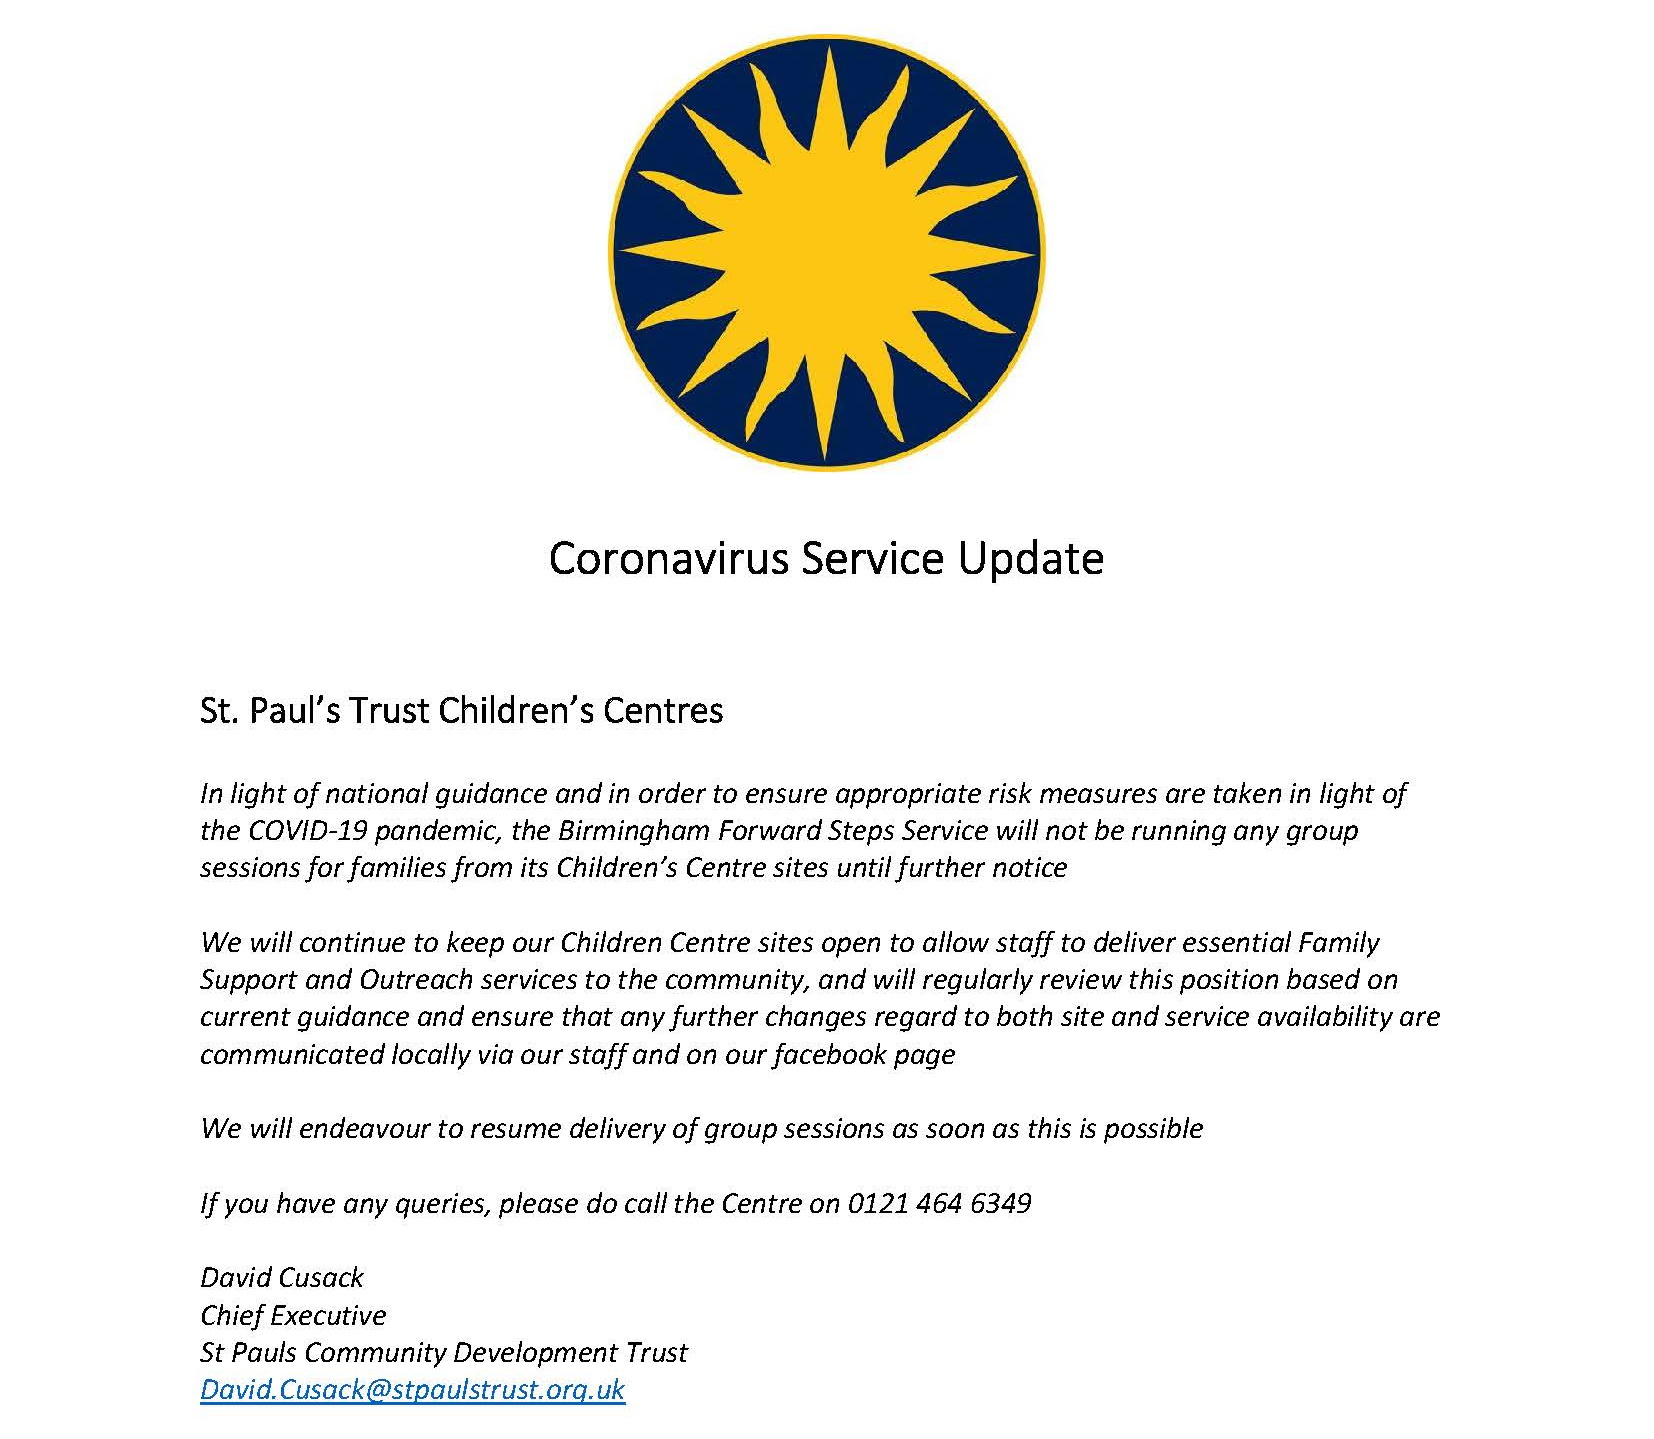 Covid-19 Children's Centre Update - Open until further notice, no services running - open for essential Family Support and Outreach.